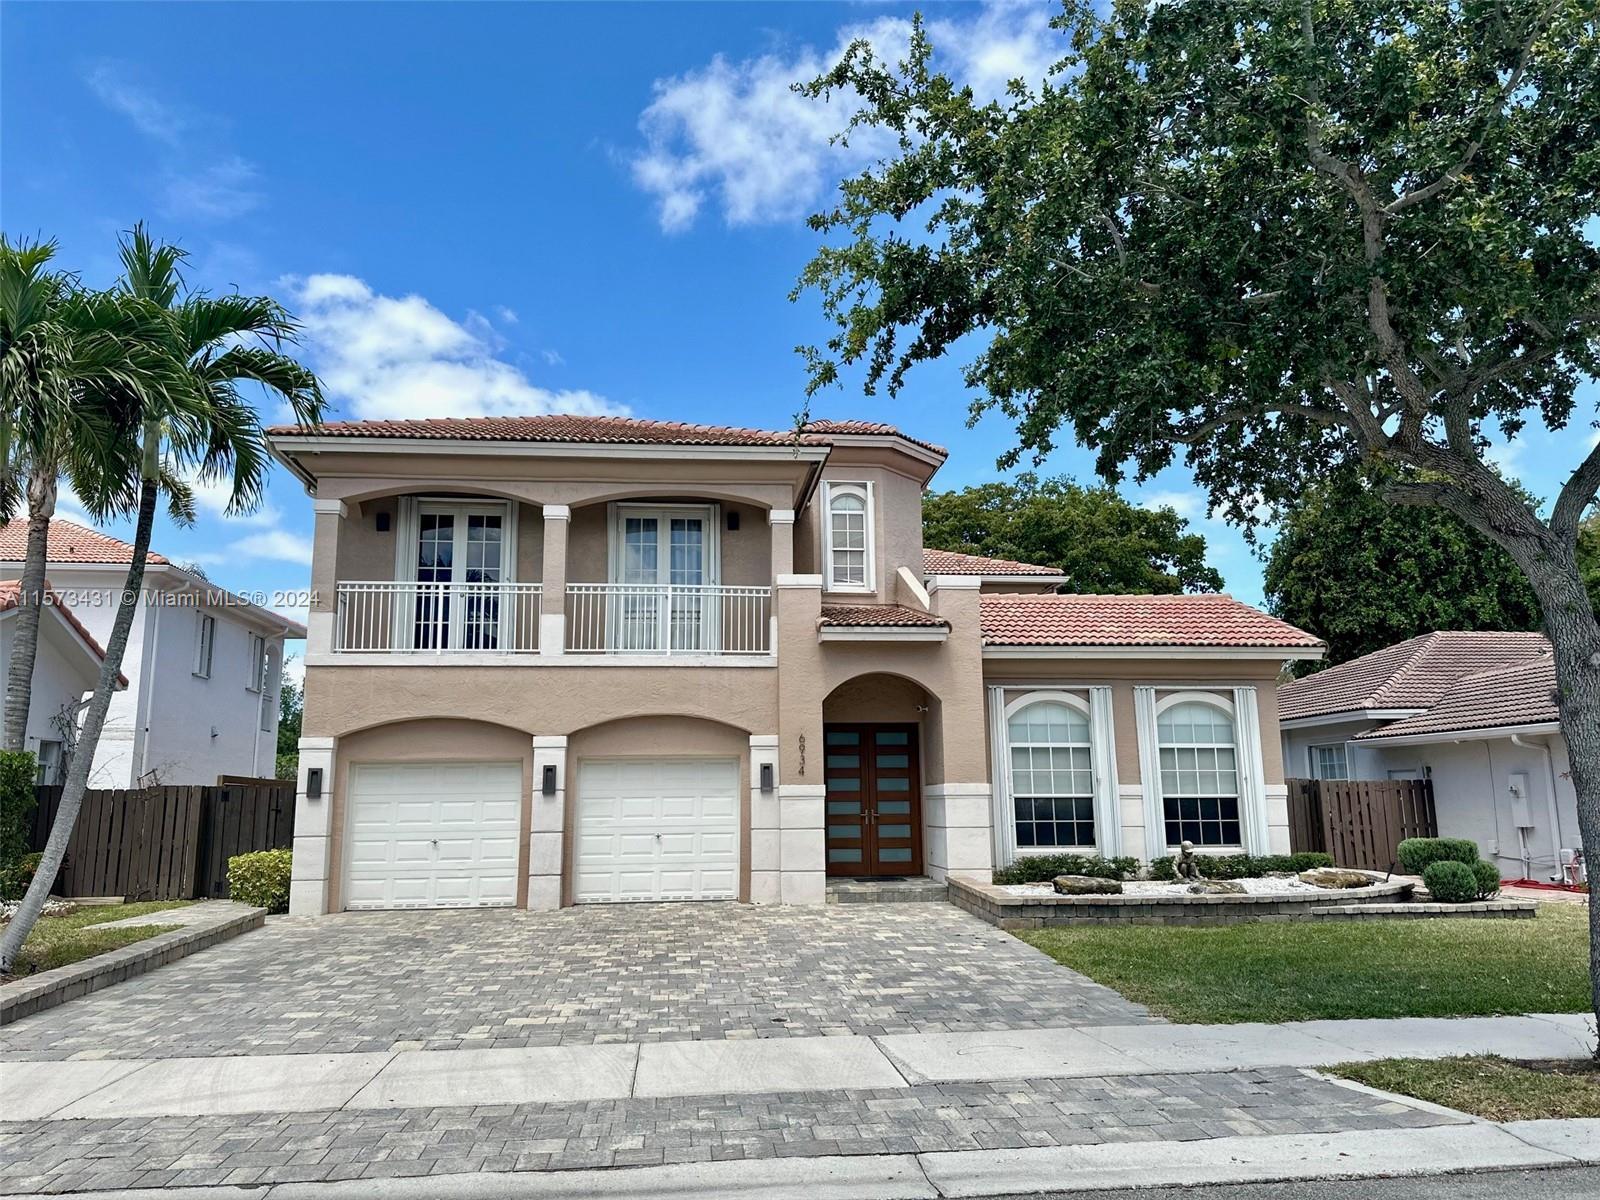 Photo of 6934 NW 113th Pl in Doral, FL